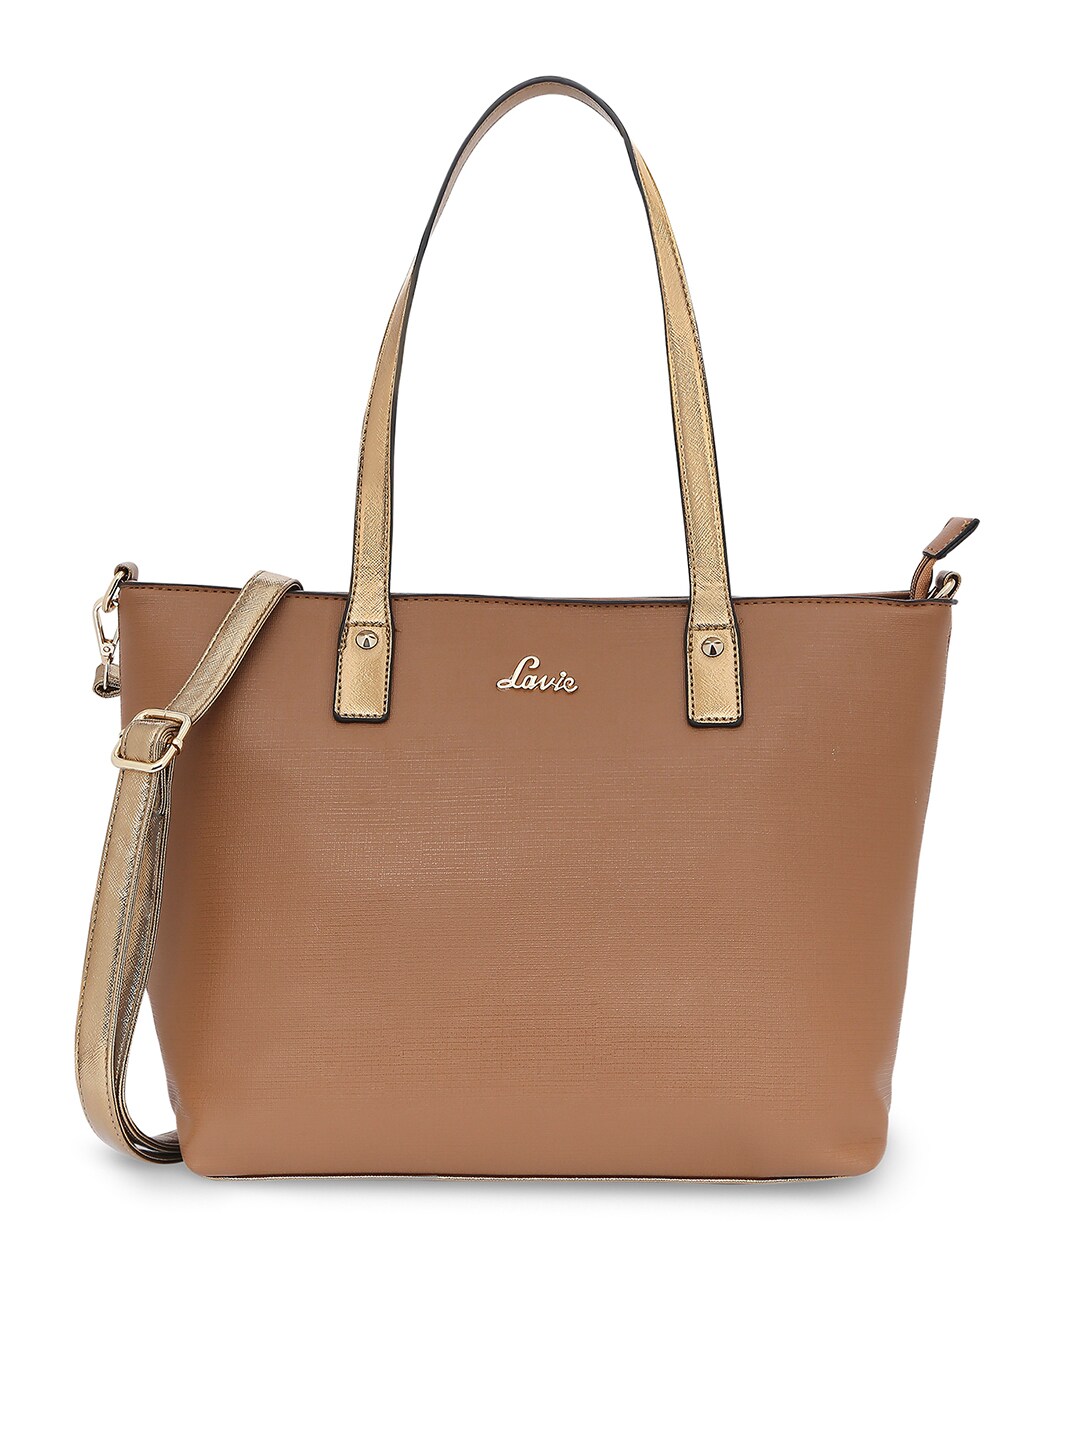 Lavie Tan Brown & Gold-Toned Structured Shoulder Bag Price in India